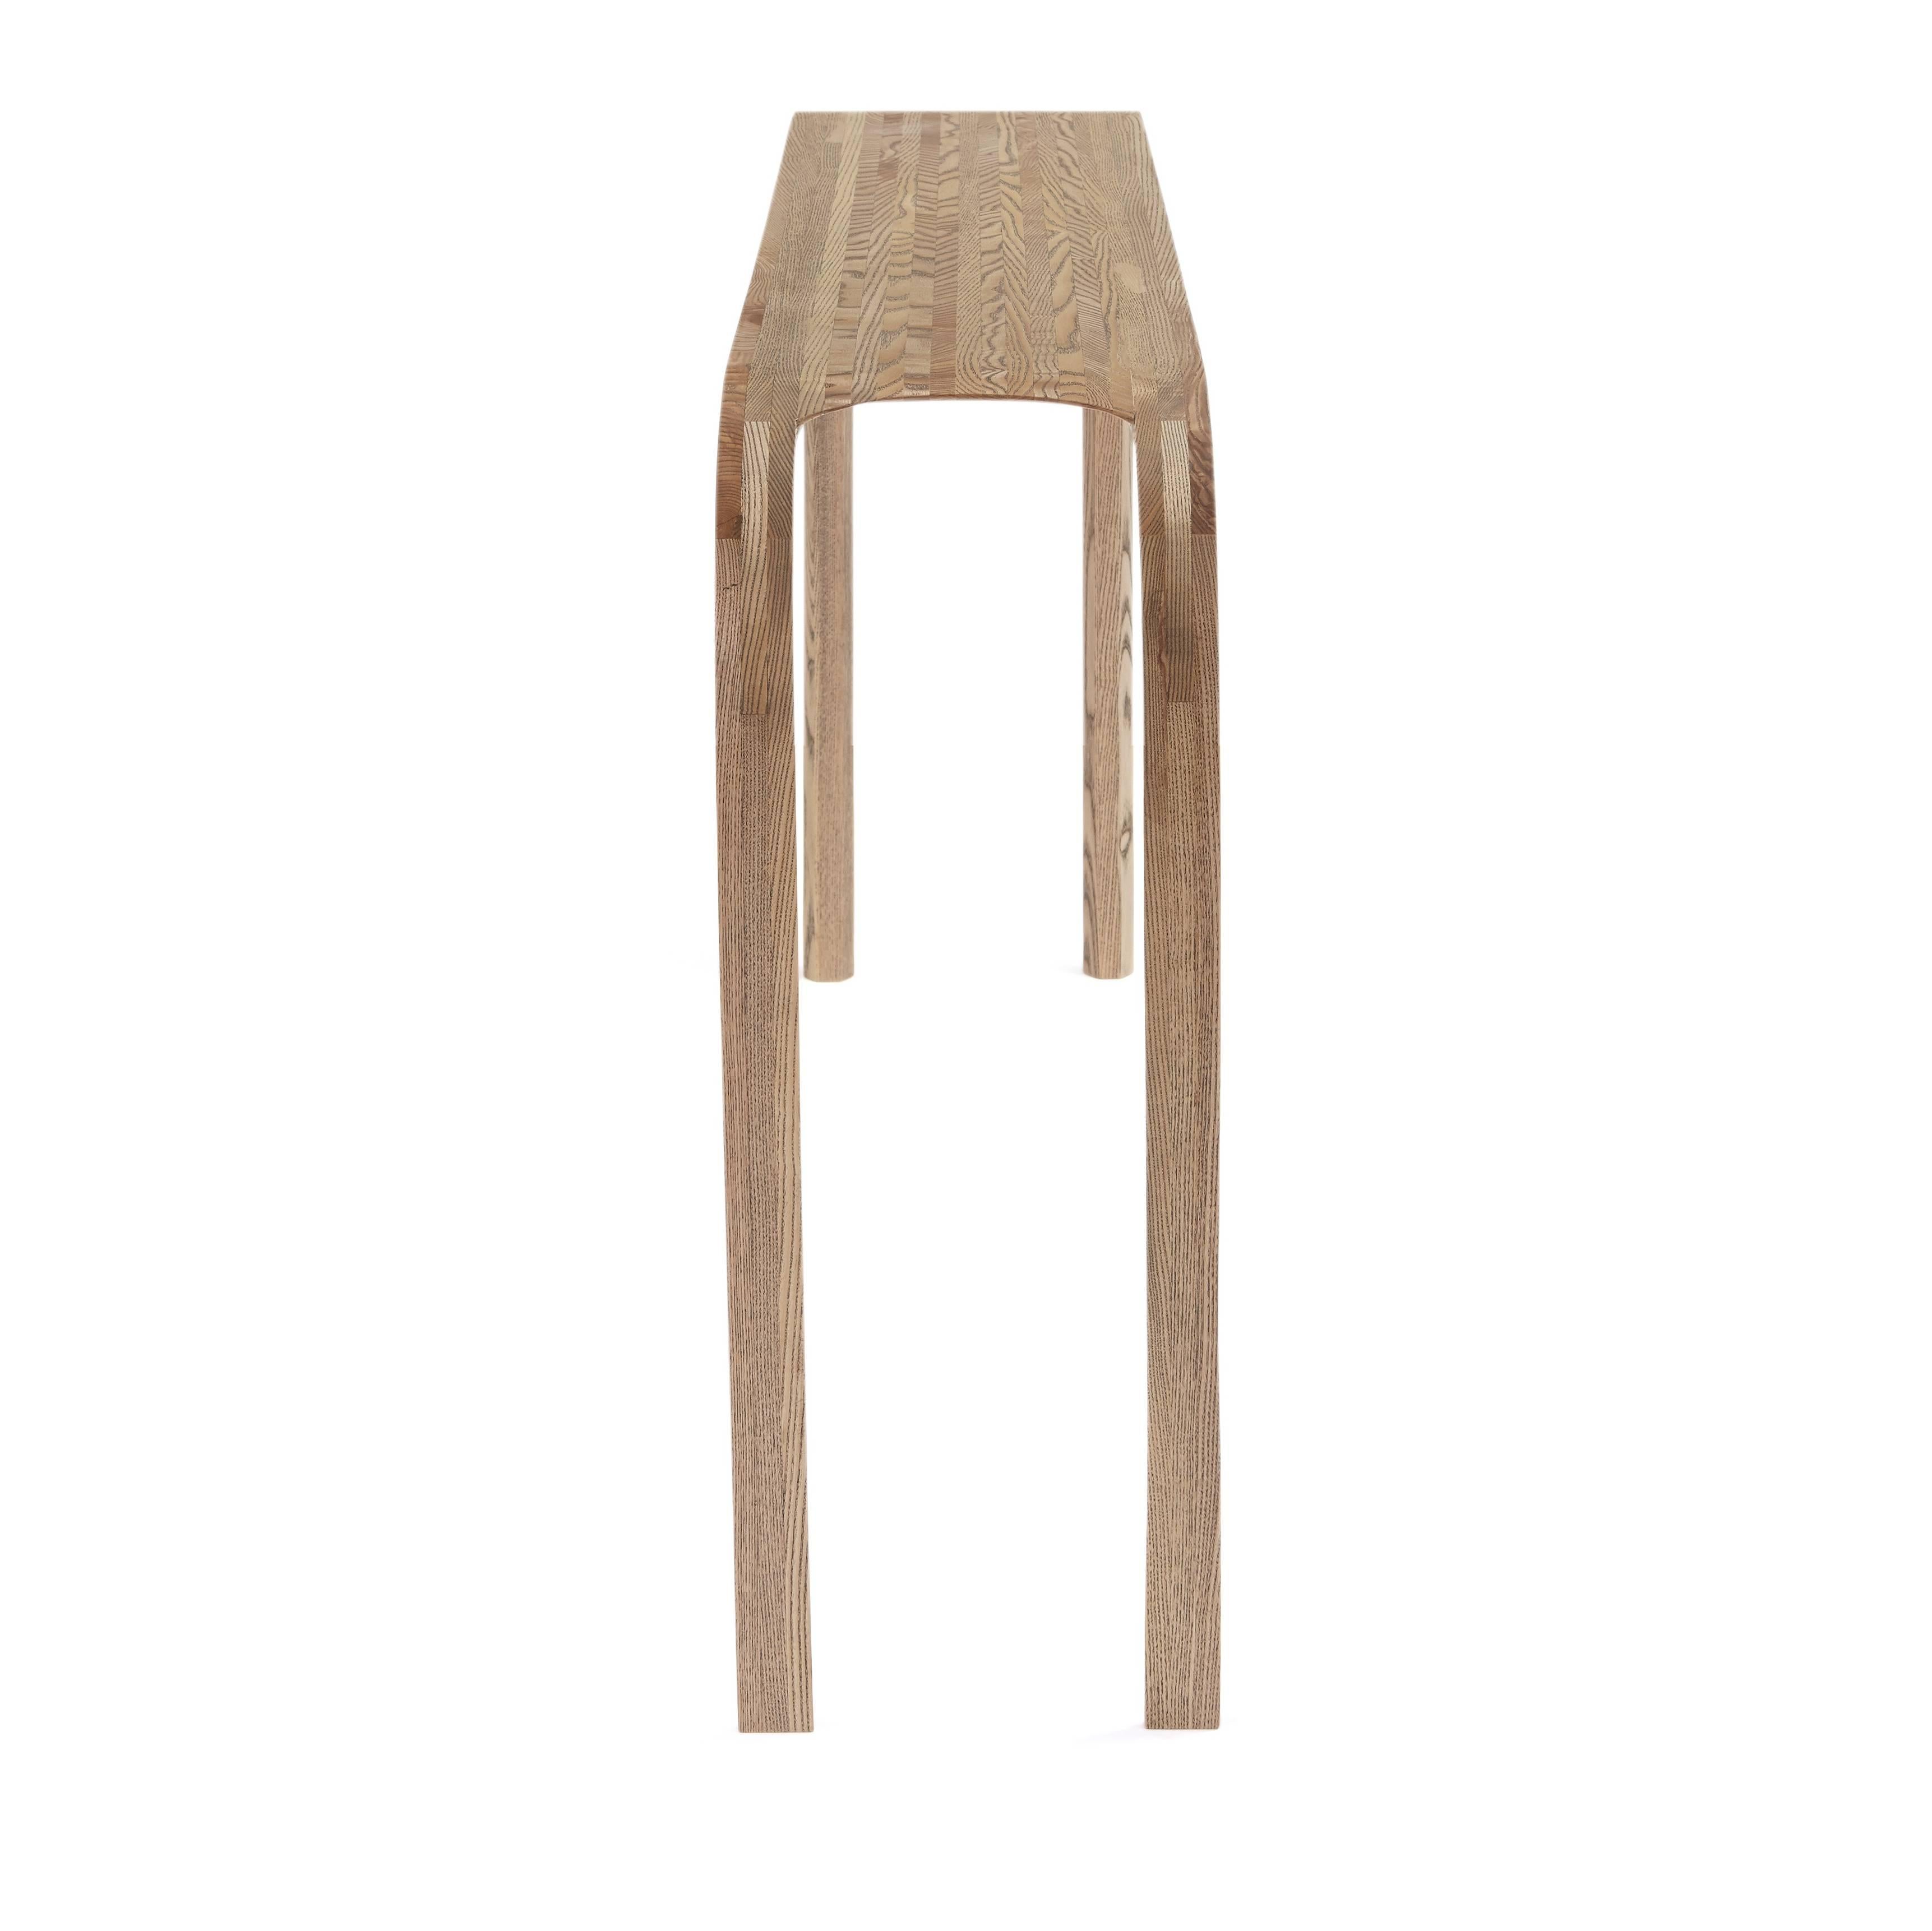 Contemporary ash console table, hand carved, edition of five, two in stock. 1